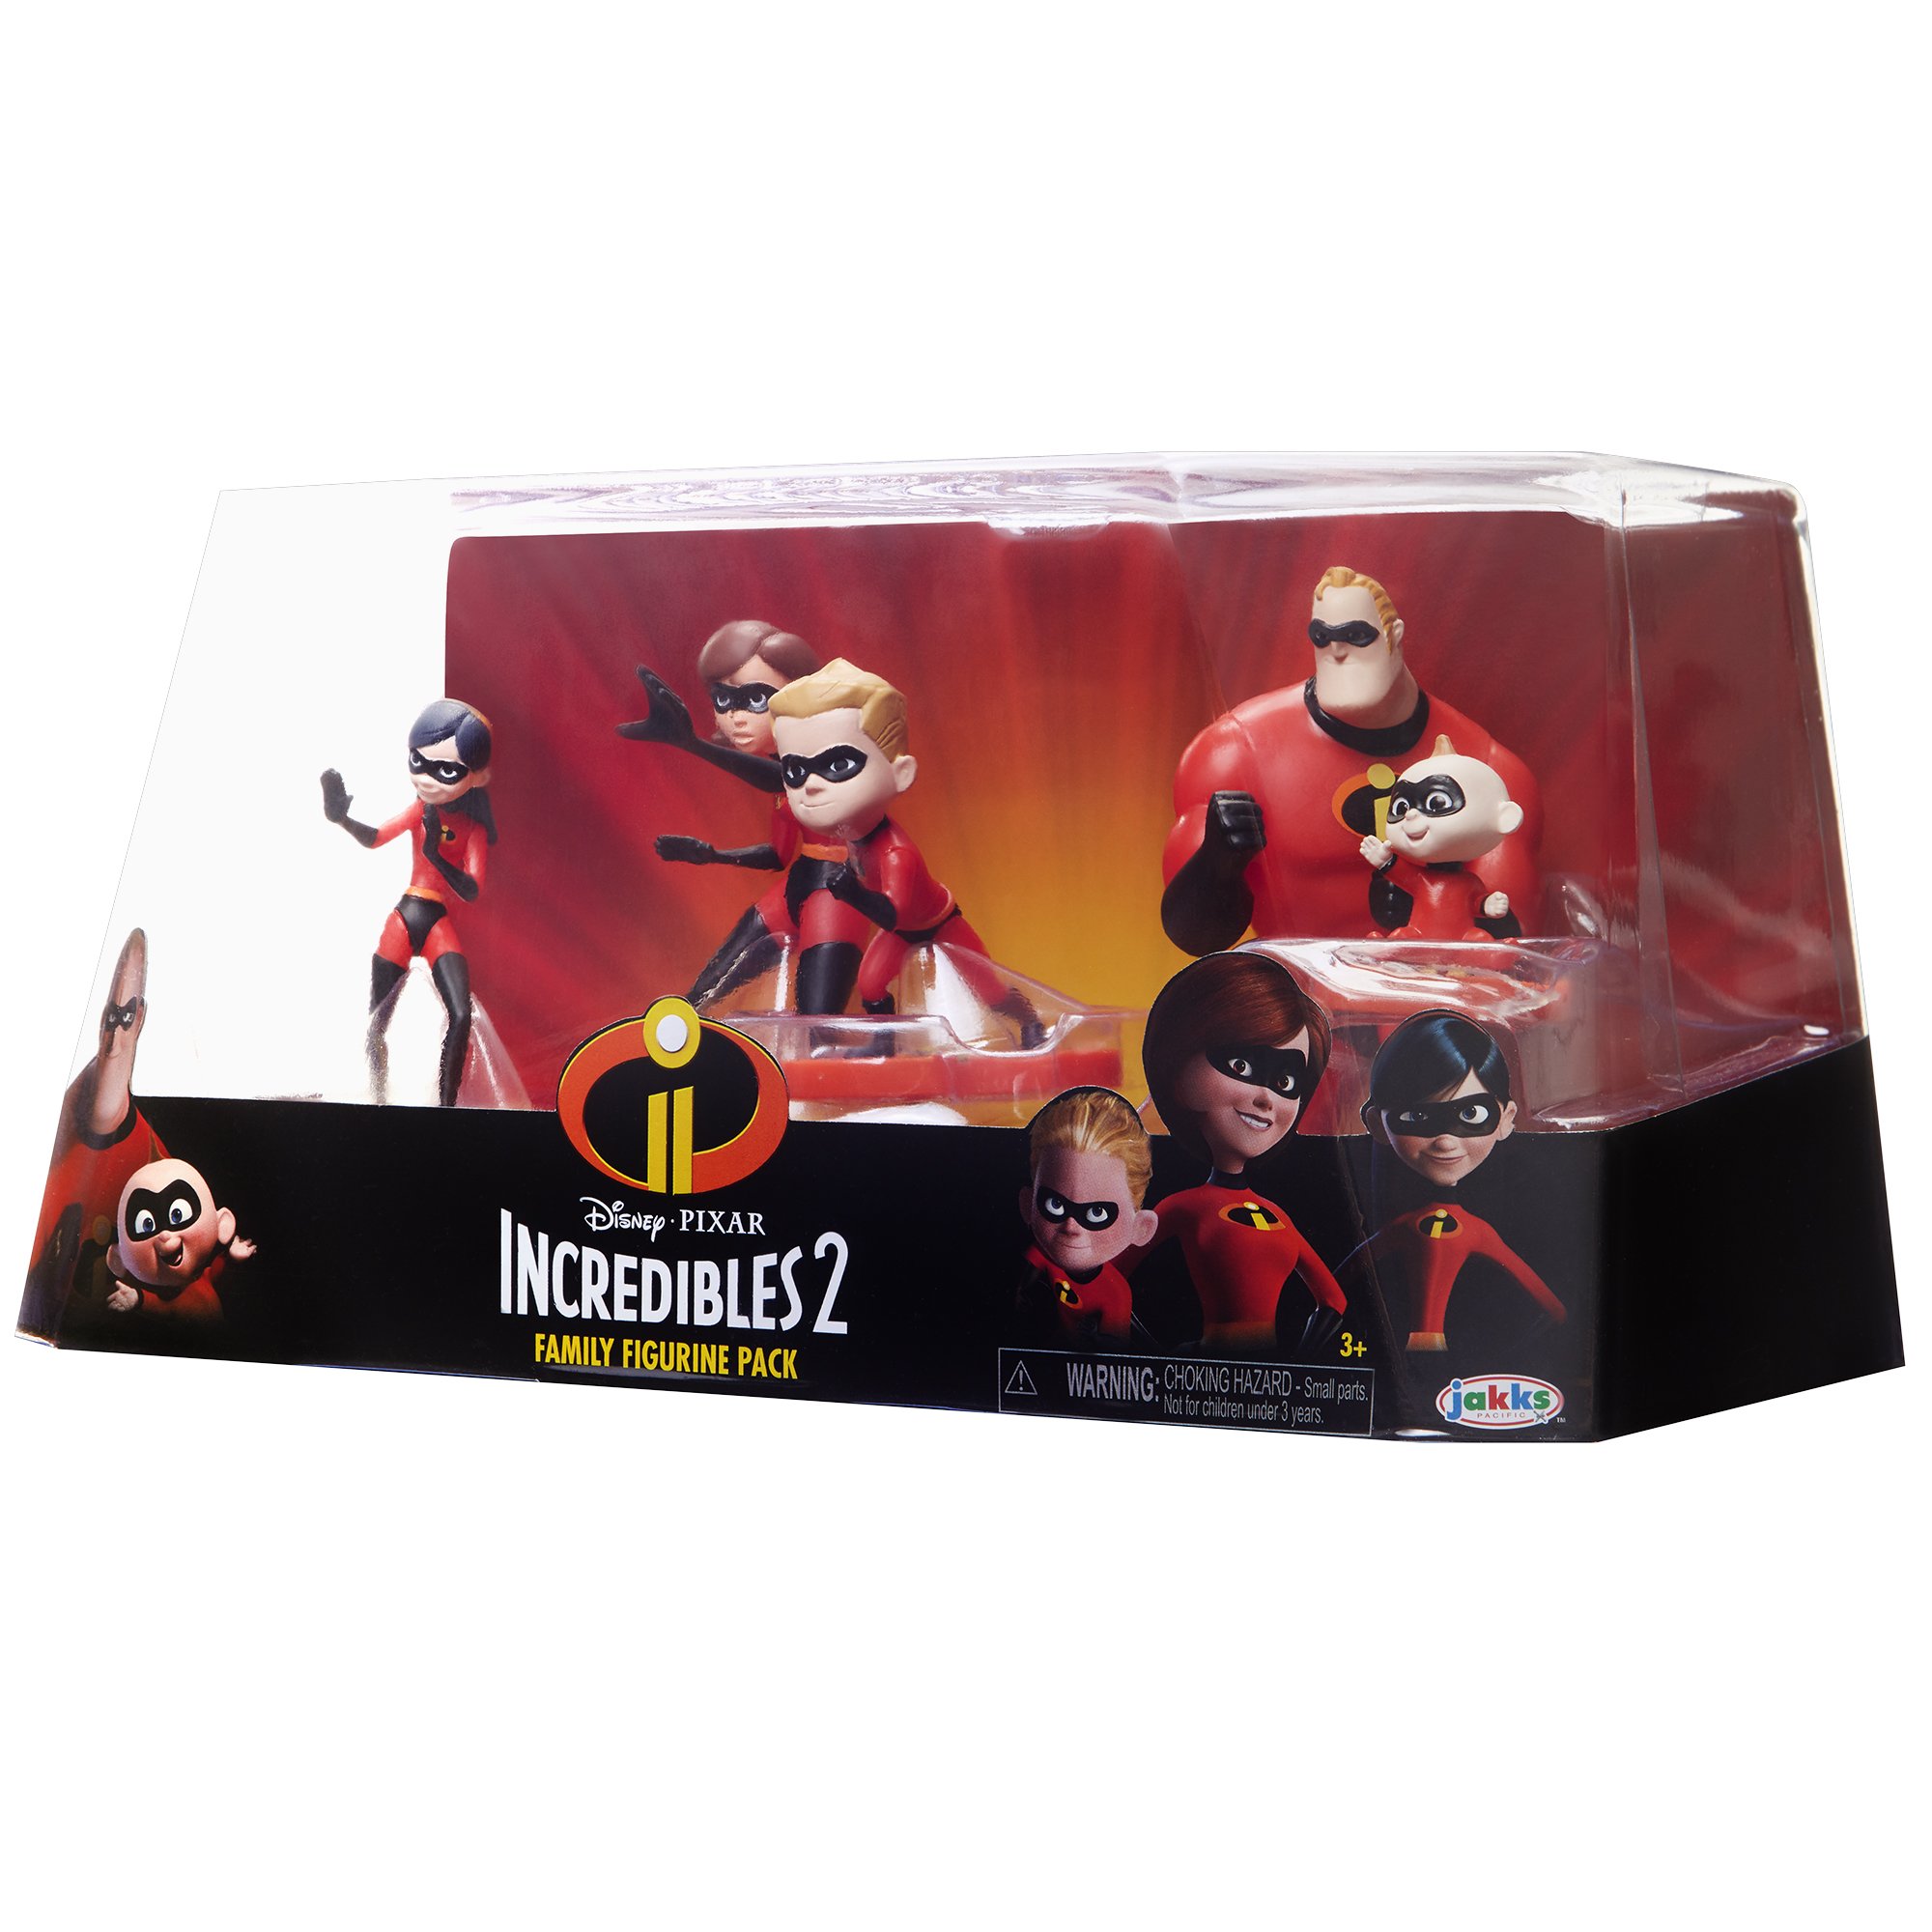 The Incredibles 2, 5 Piece Family Figure Set comes with (Mr./Mrs. Incredible, Violet, Dash, Jack Jack)